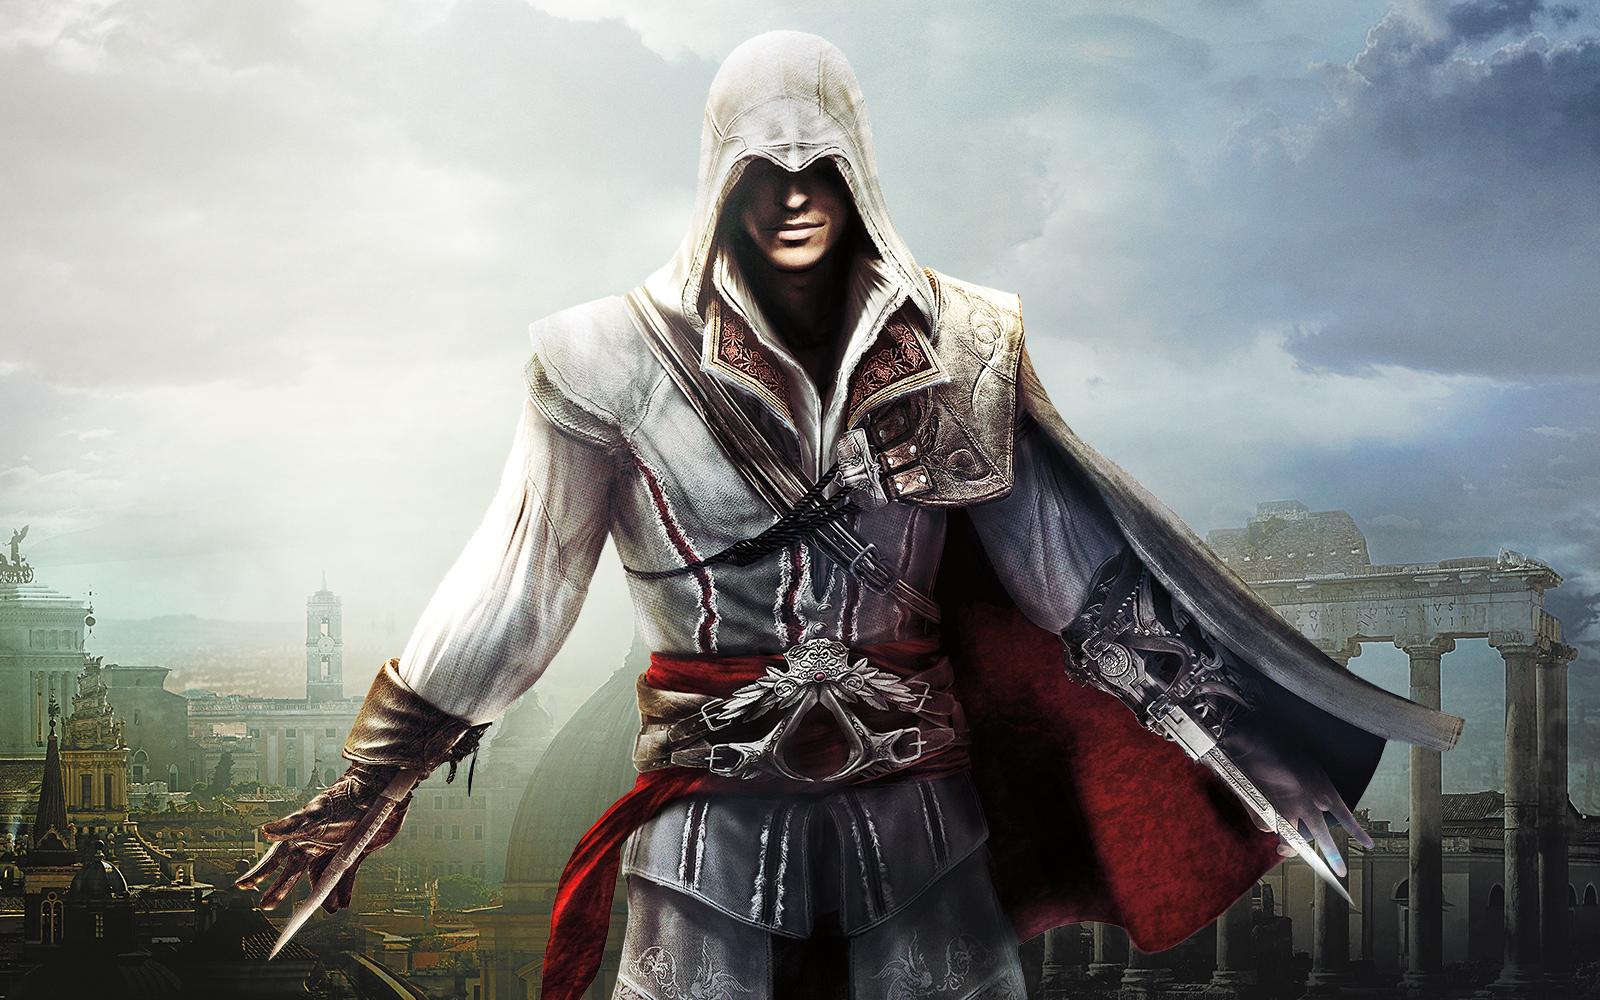 Ranking the assassins of Assassins Creed